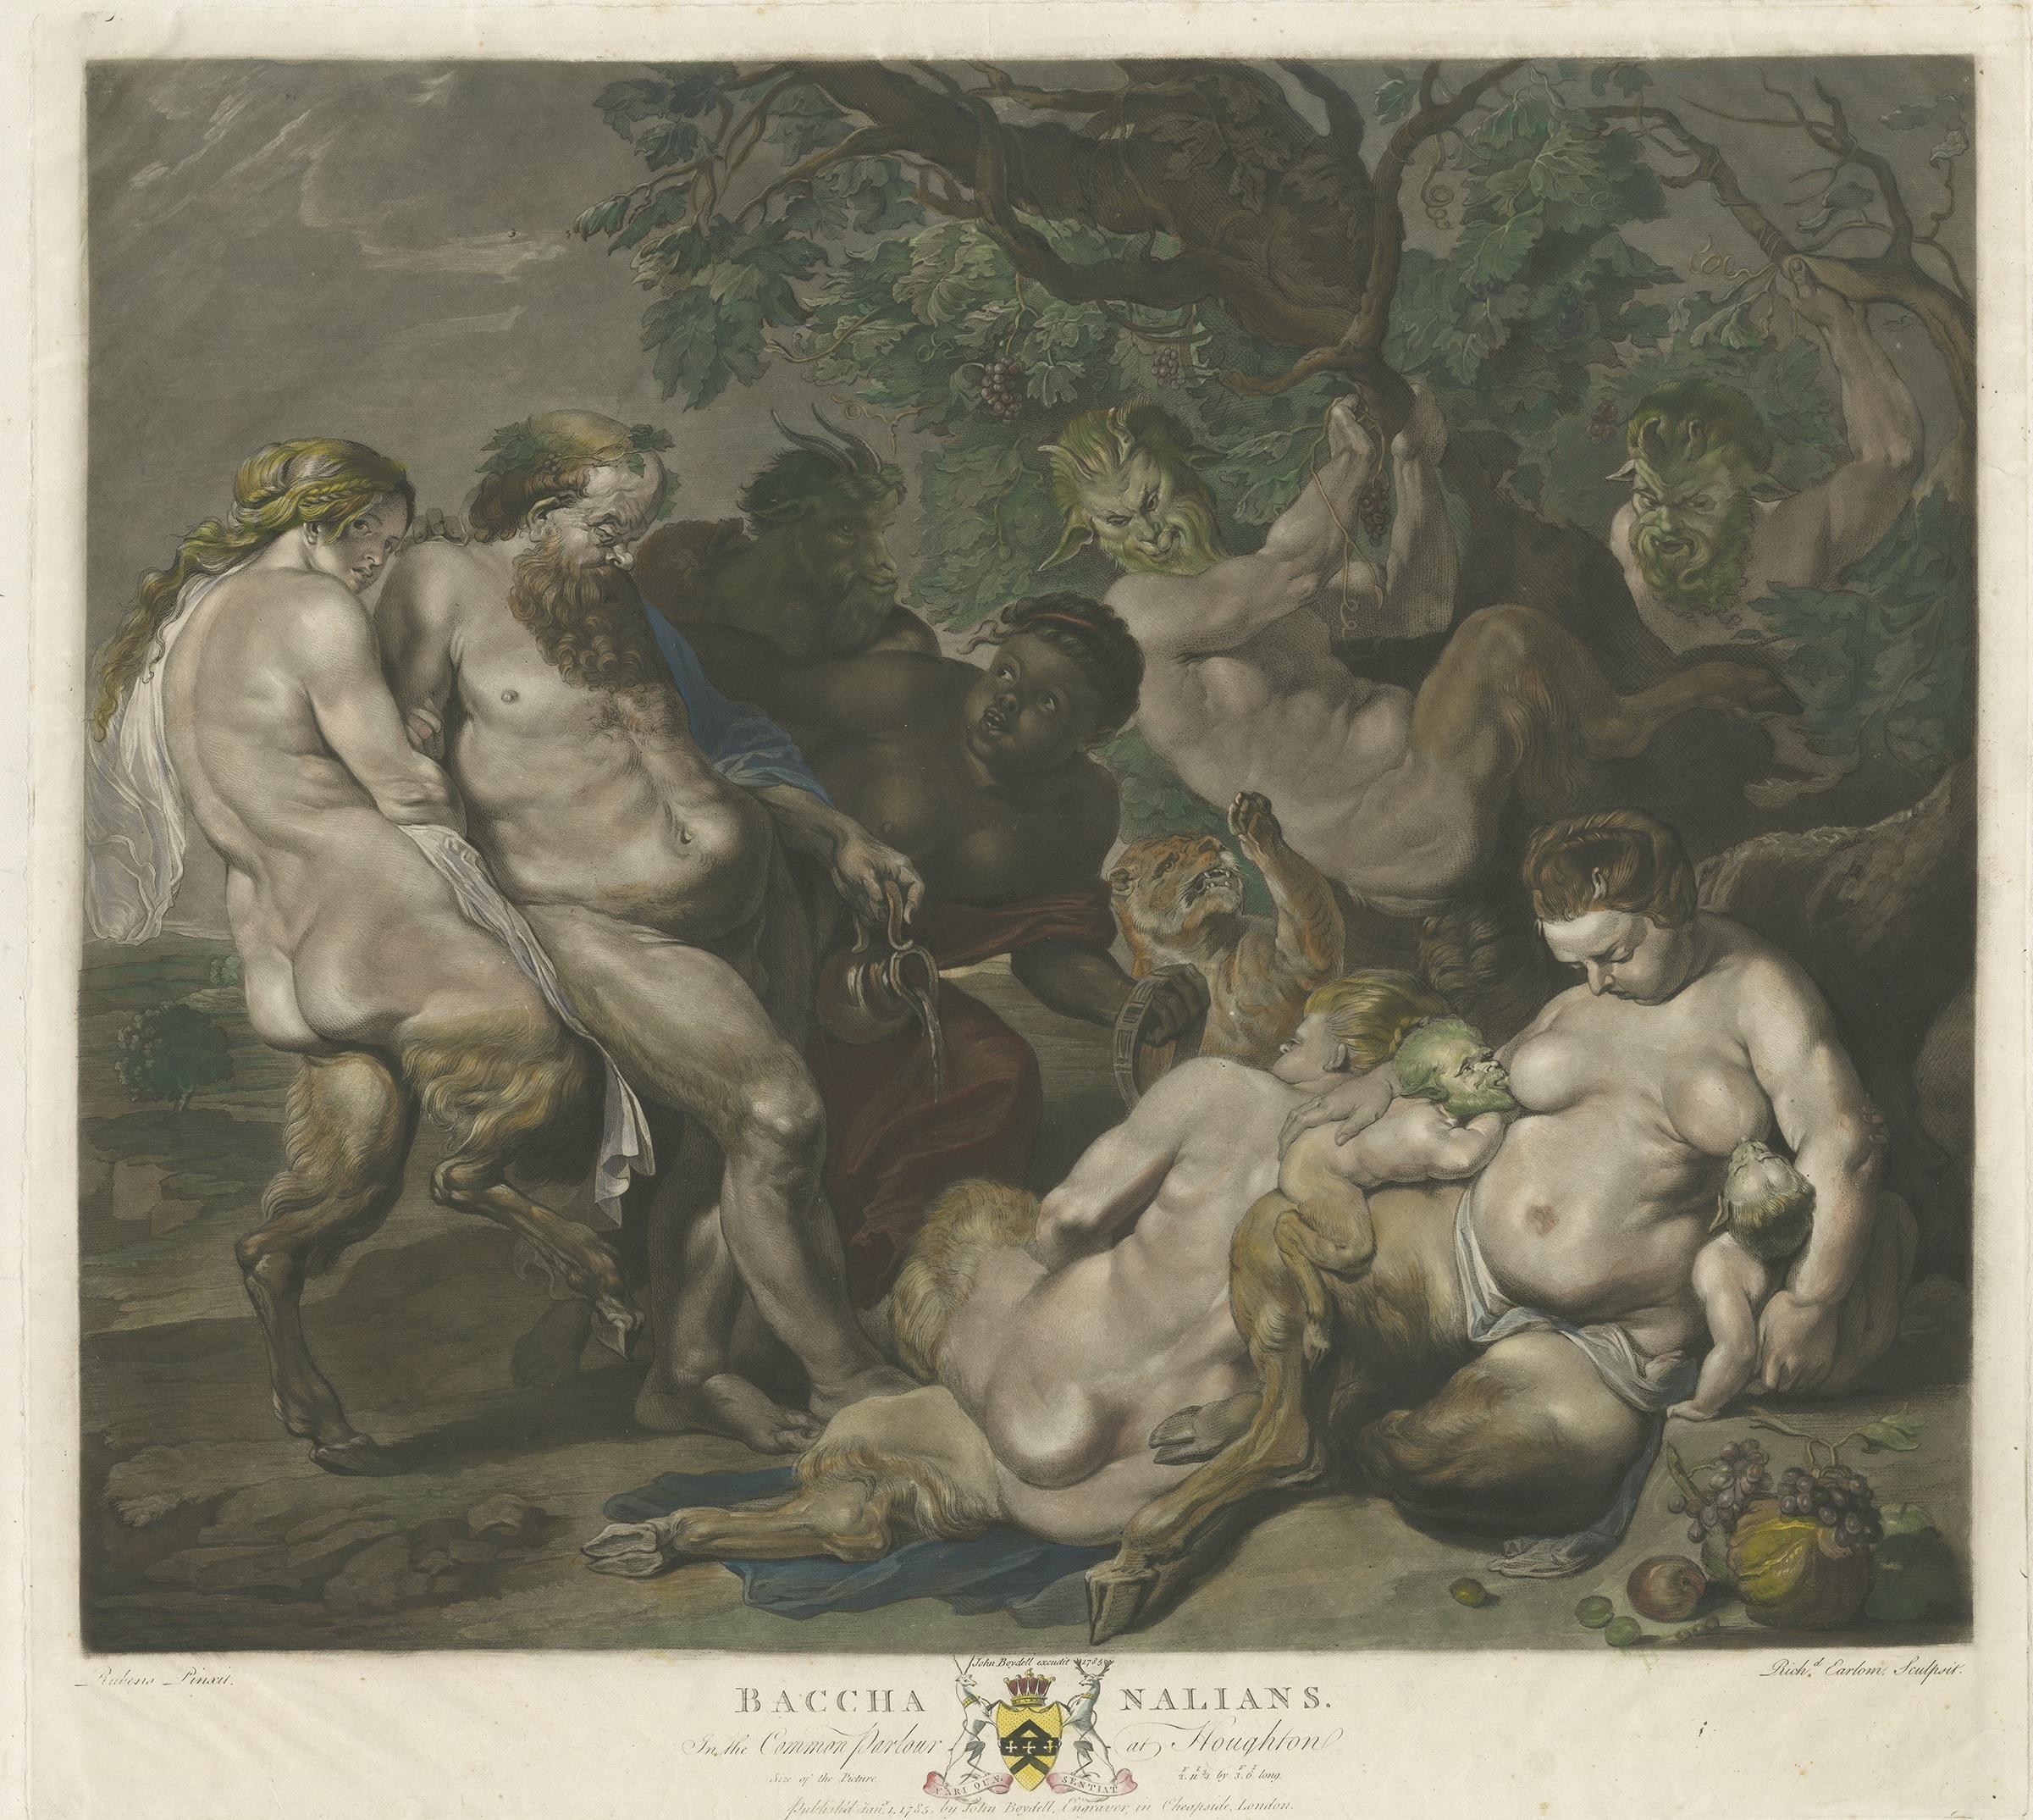 Antique print titled 'Baccha Nalians'. Rare large-sized mezzotint made after the painting 'The March of Silenus' by Peter Paul Rubens. A drunken Silenus slouching at left and letting his jug spill, supported by a fauness and a black woman holding a